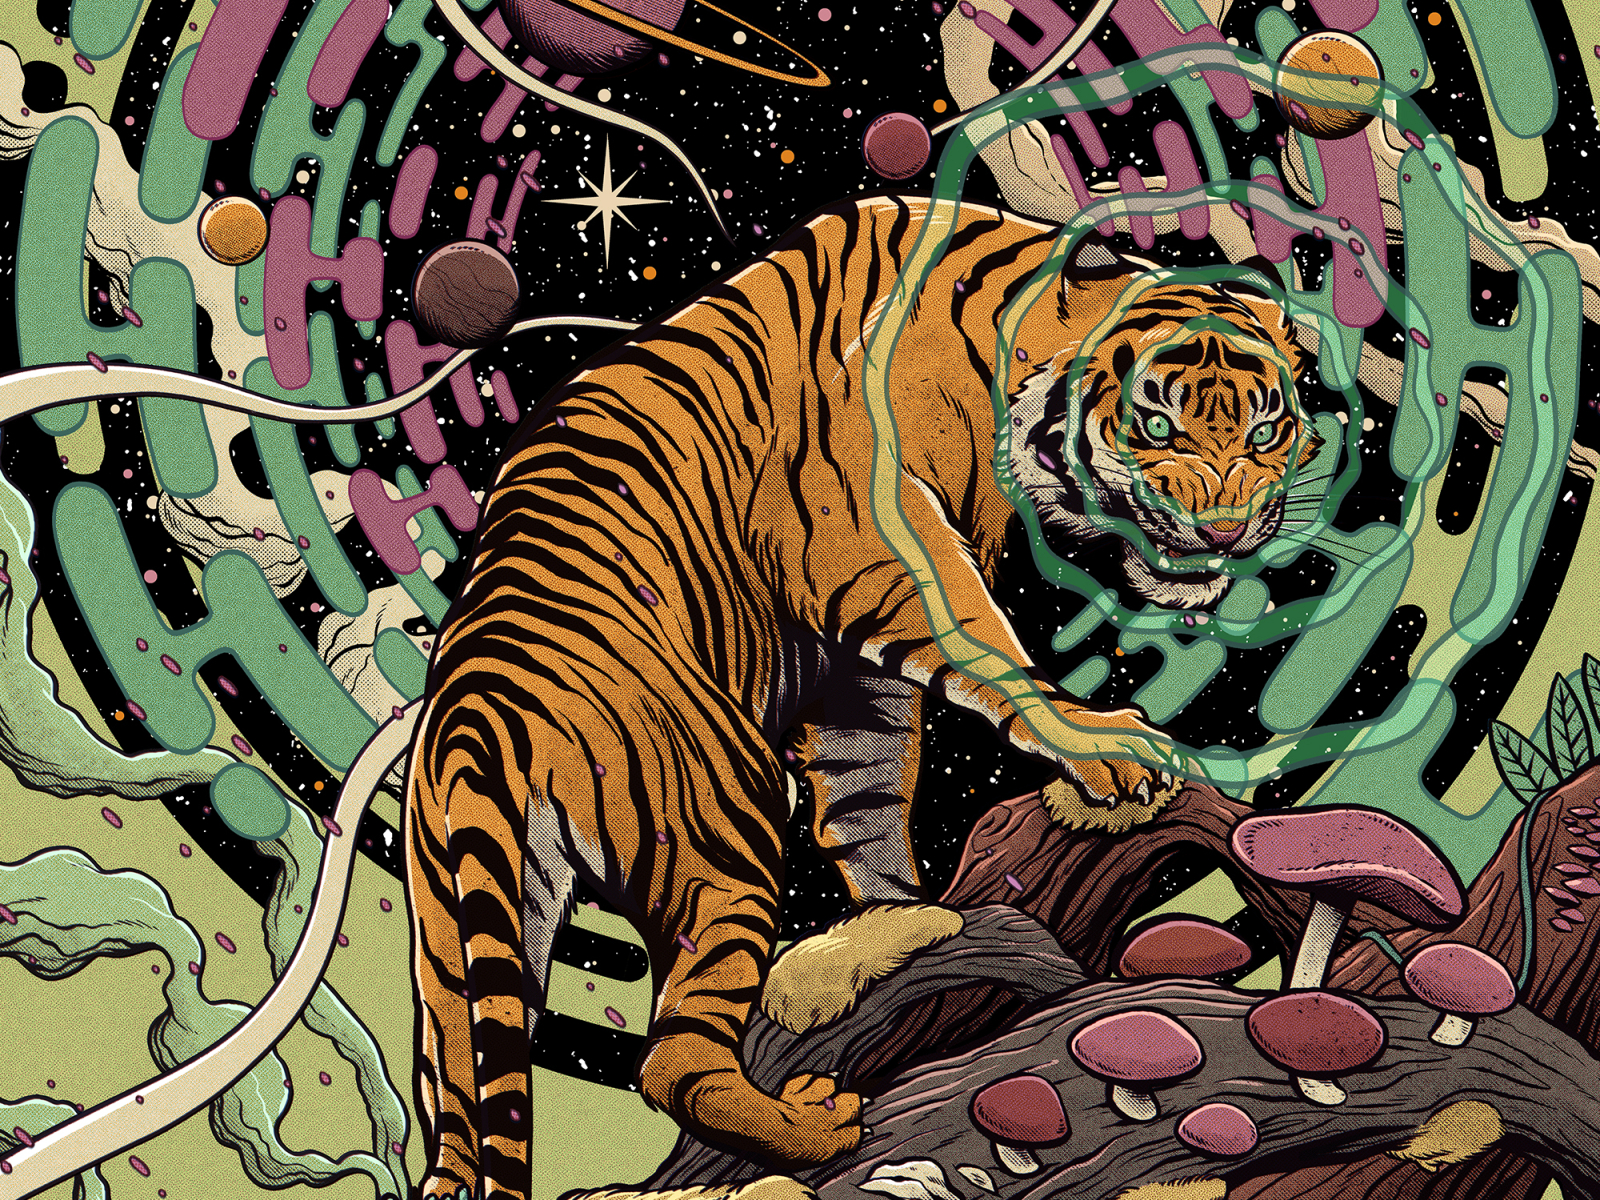 Moe. New year's eve in Las Vegas gig poster illustration mushroom music nature poster psychedelic savage show space tiger trippy